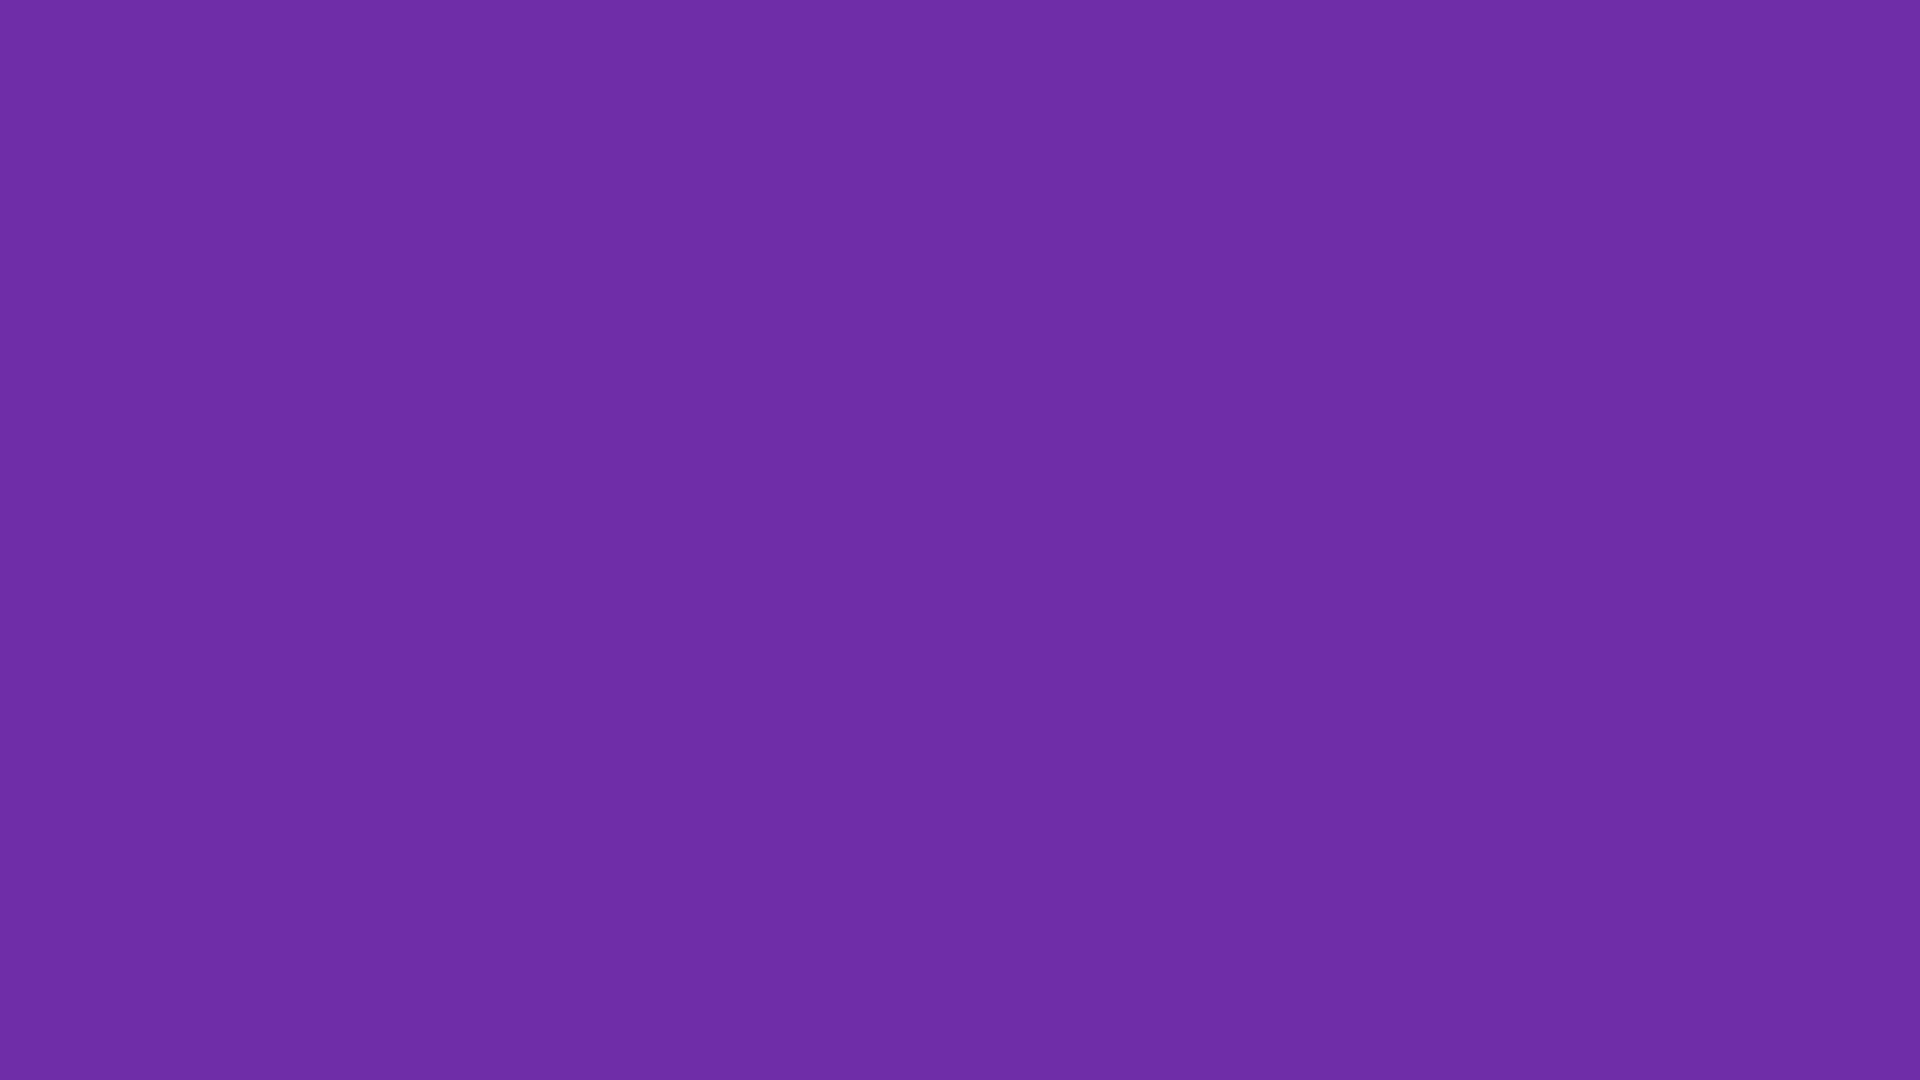 1920x1080 Grape Solid Color Background